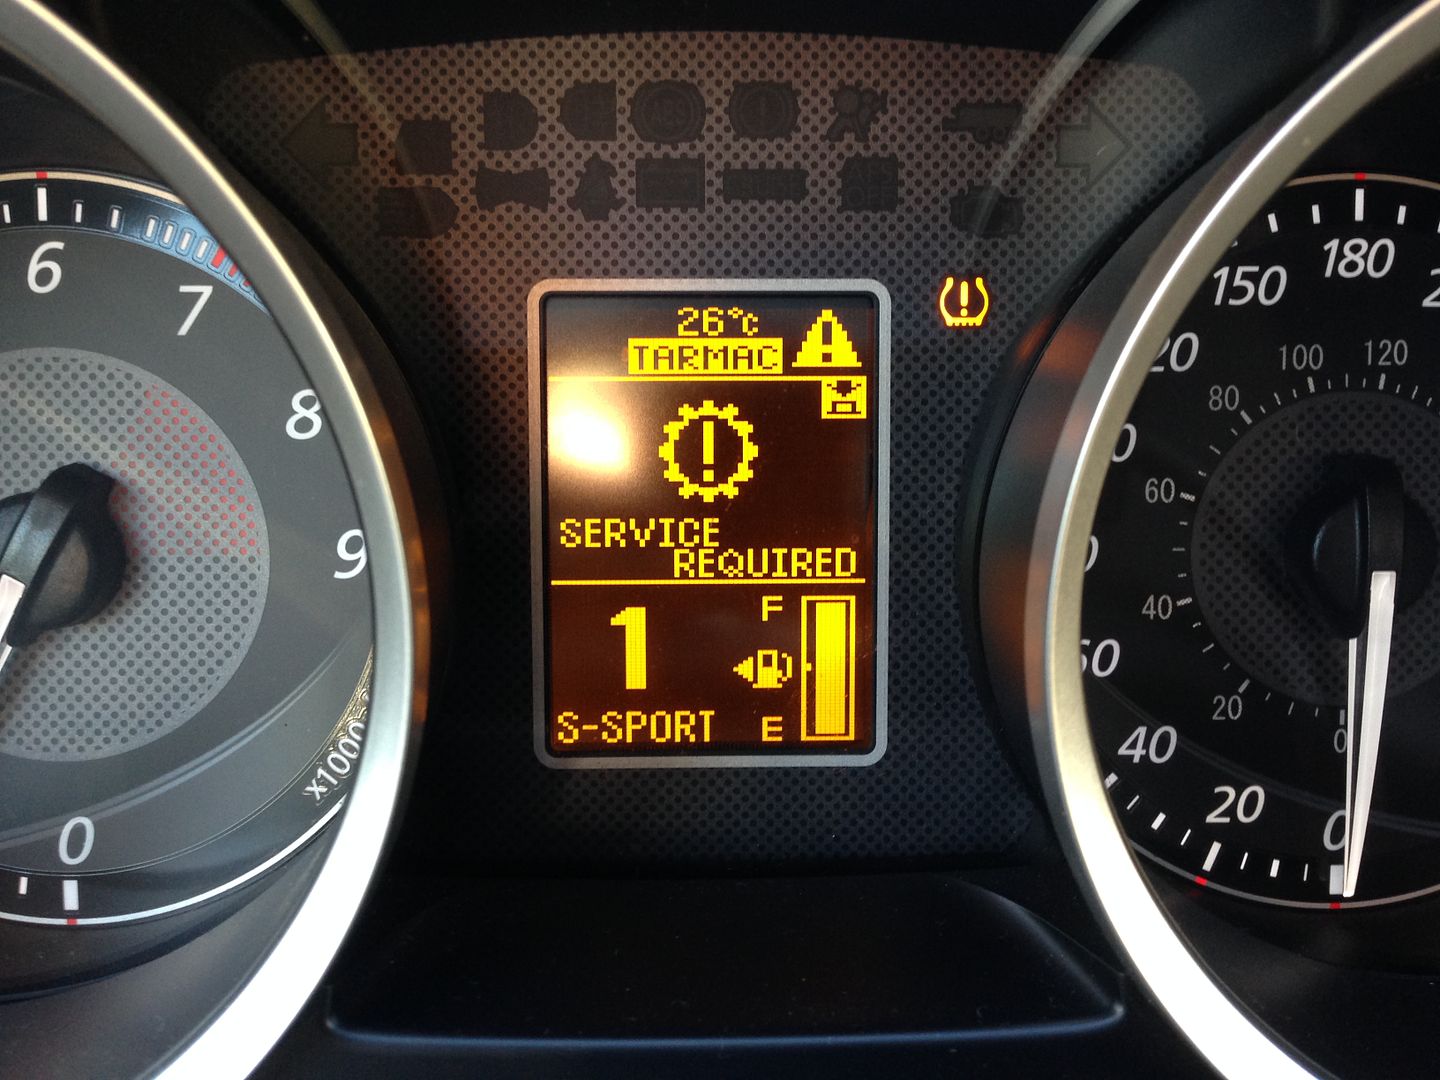 Anyone Know What This "Service Required" Light Is About?? | Mitsubishi Lancer Evolution Forum